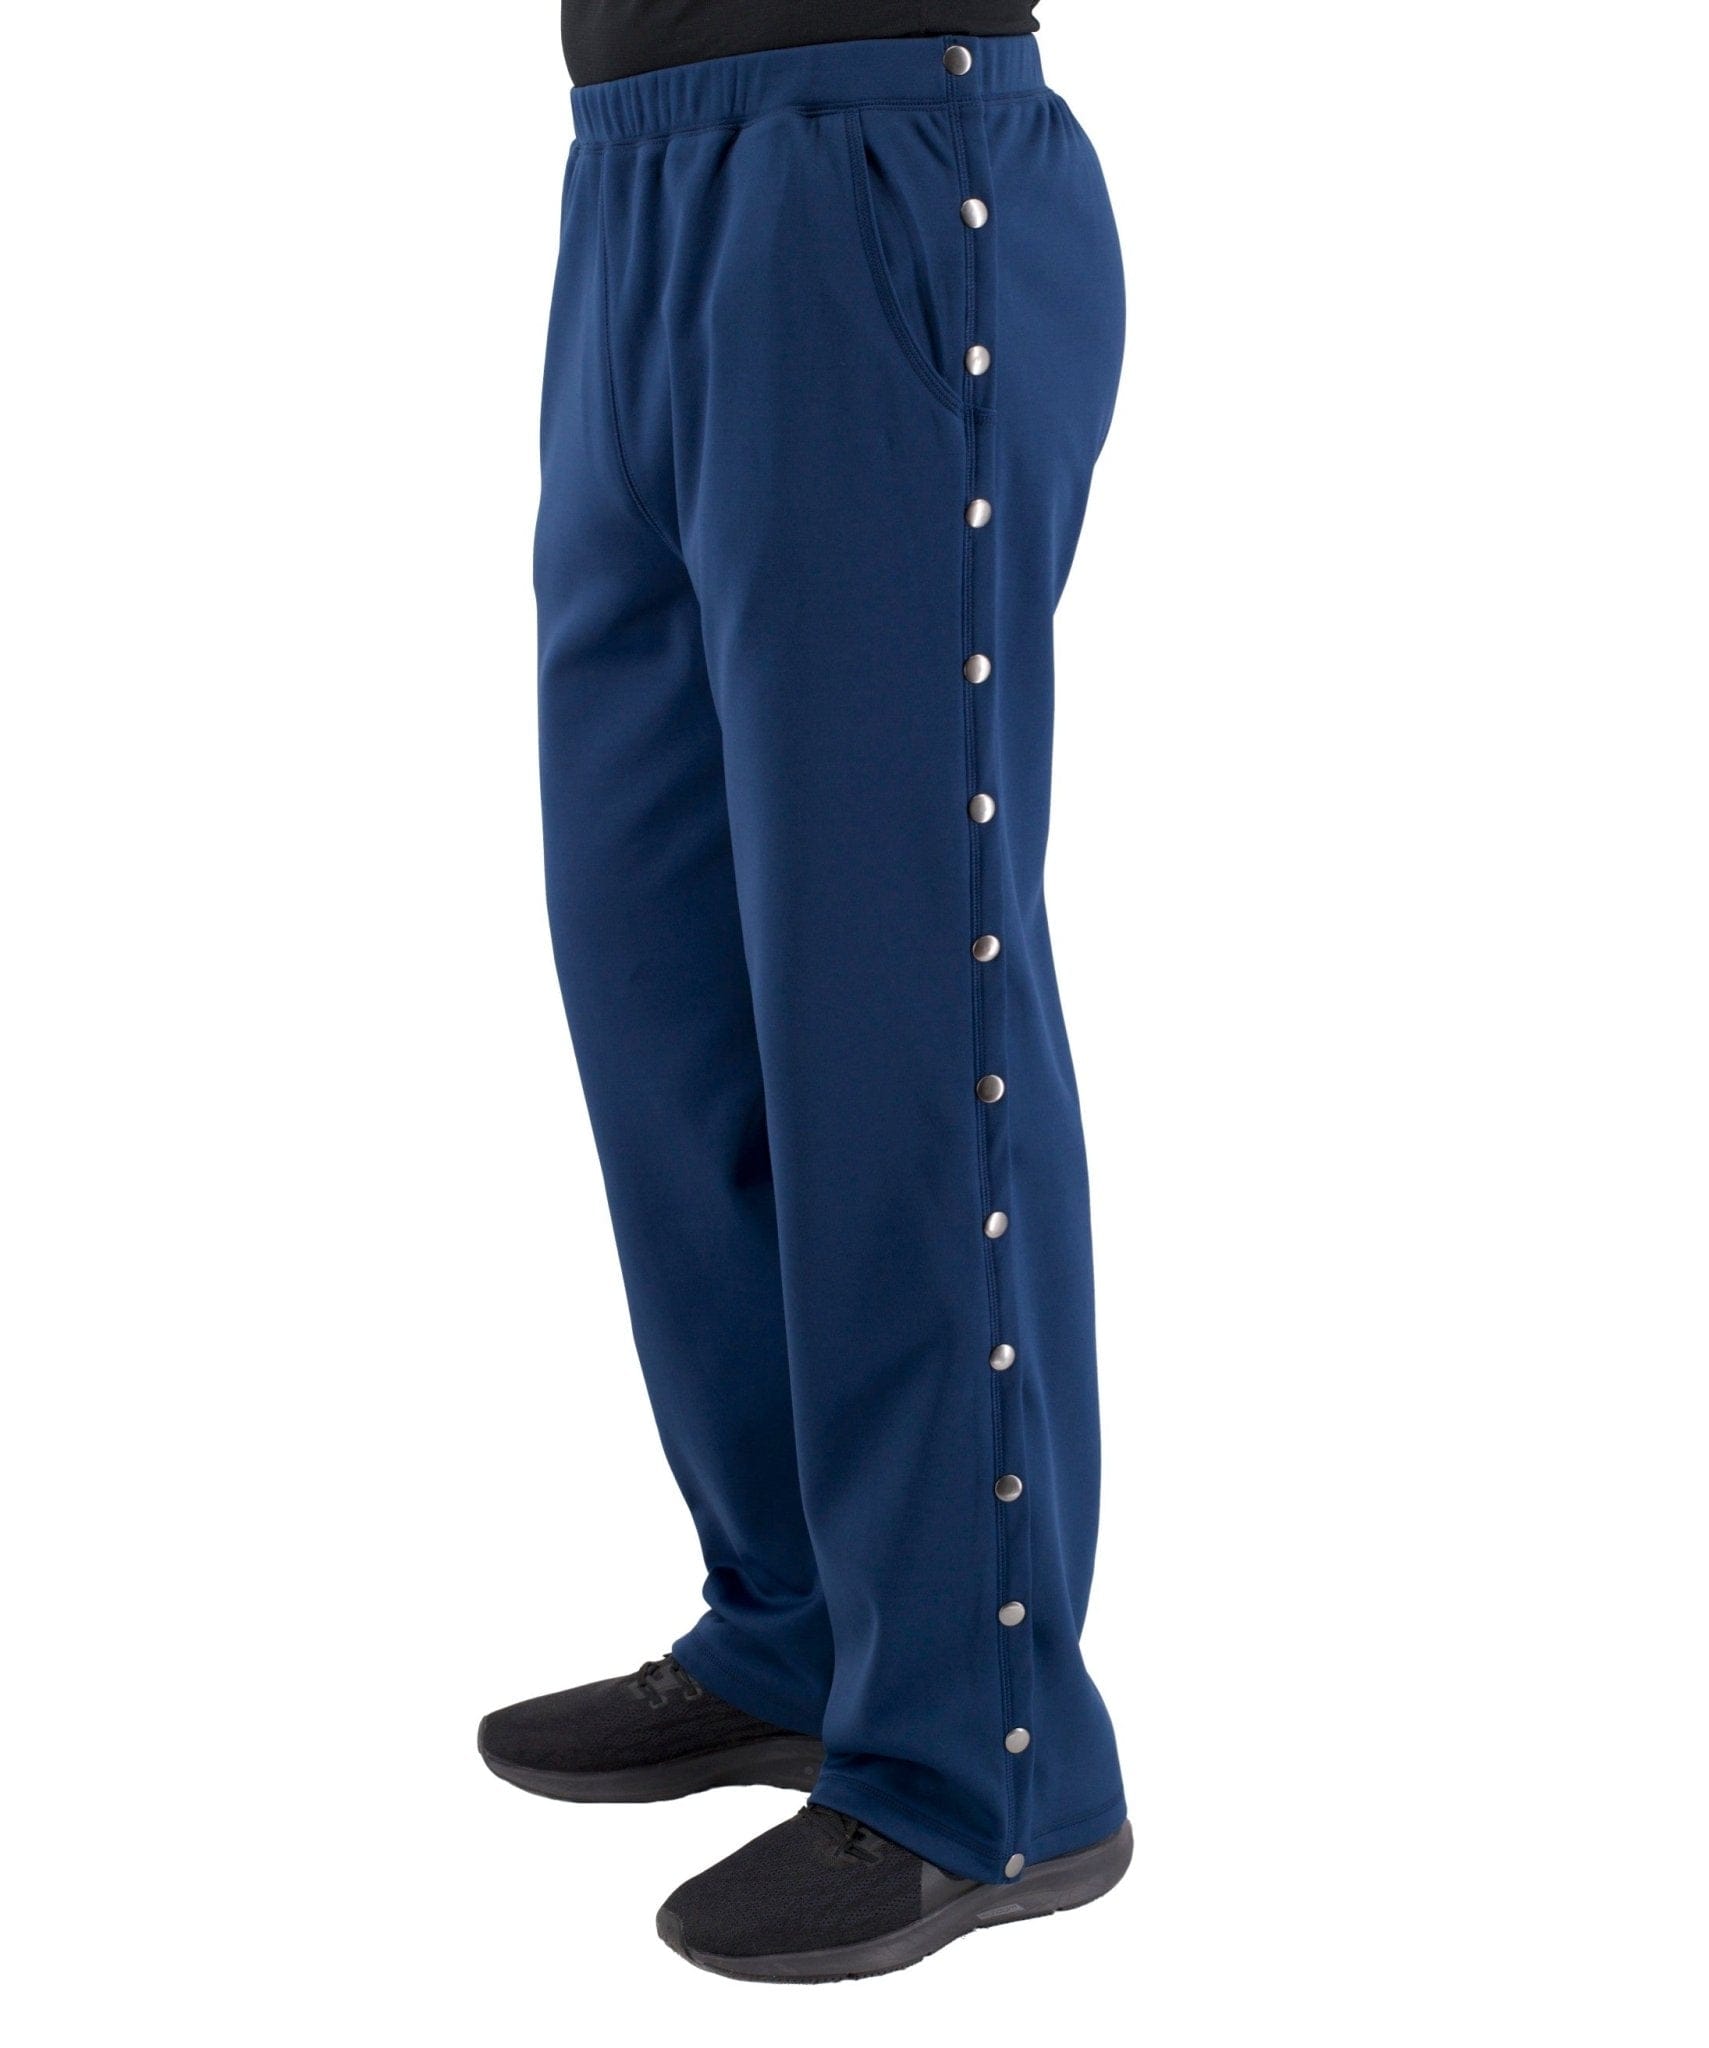 Surgery Tearaway Pants  Best Pants for Surgery Recovery